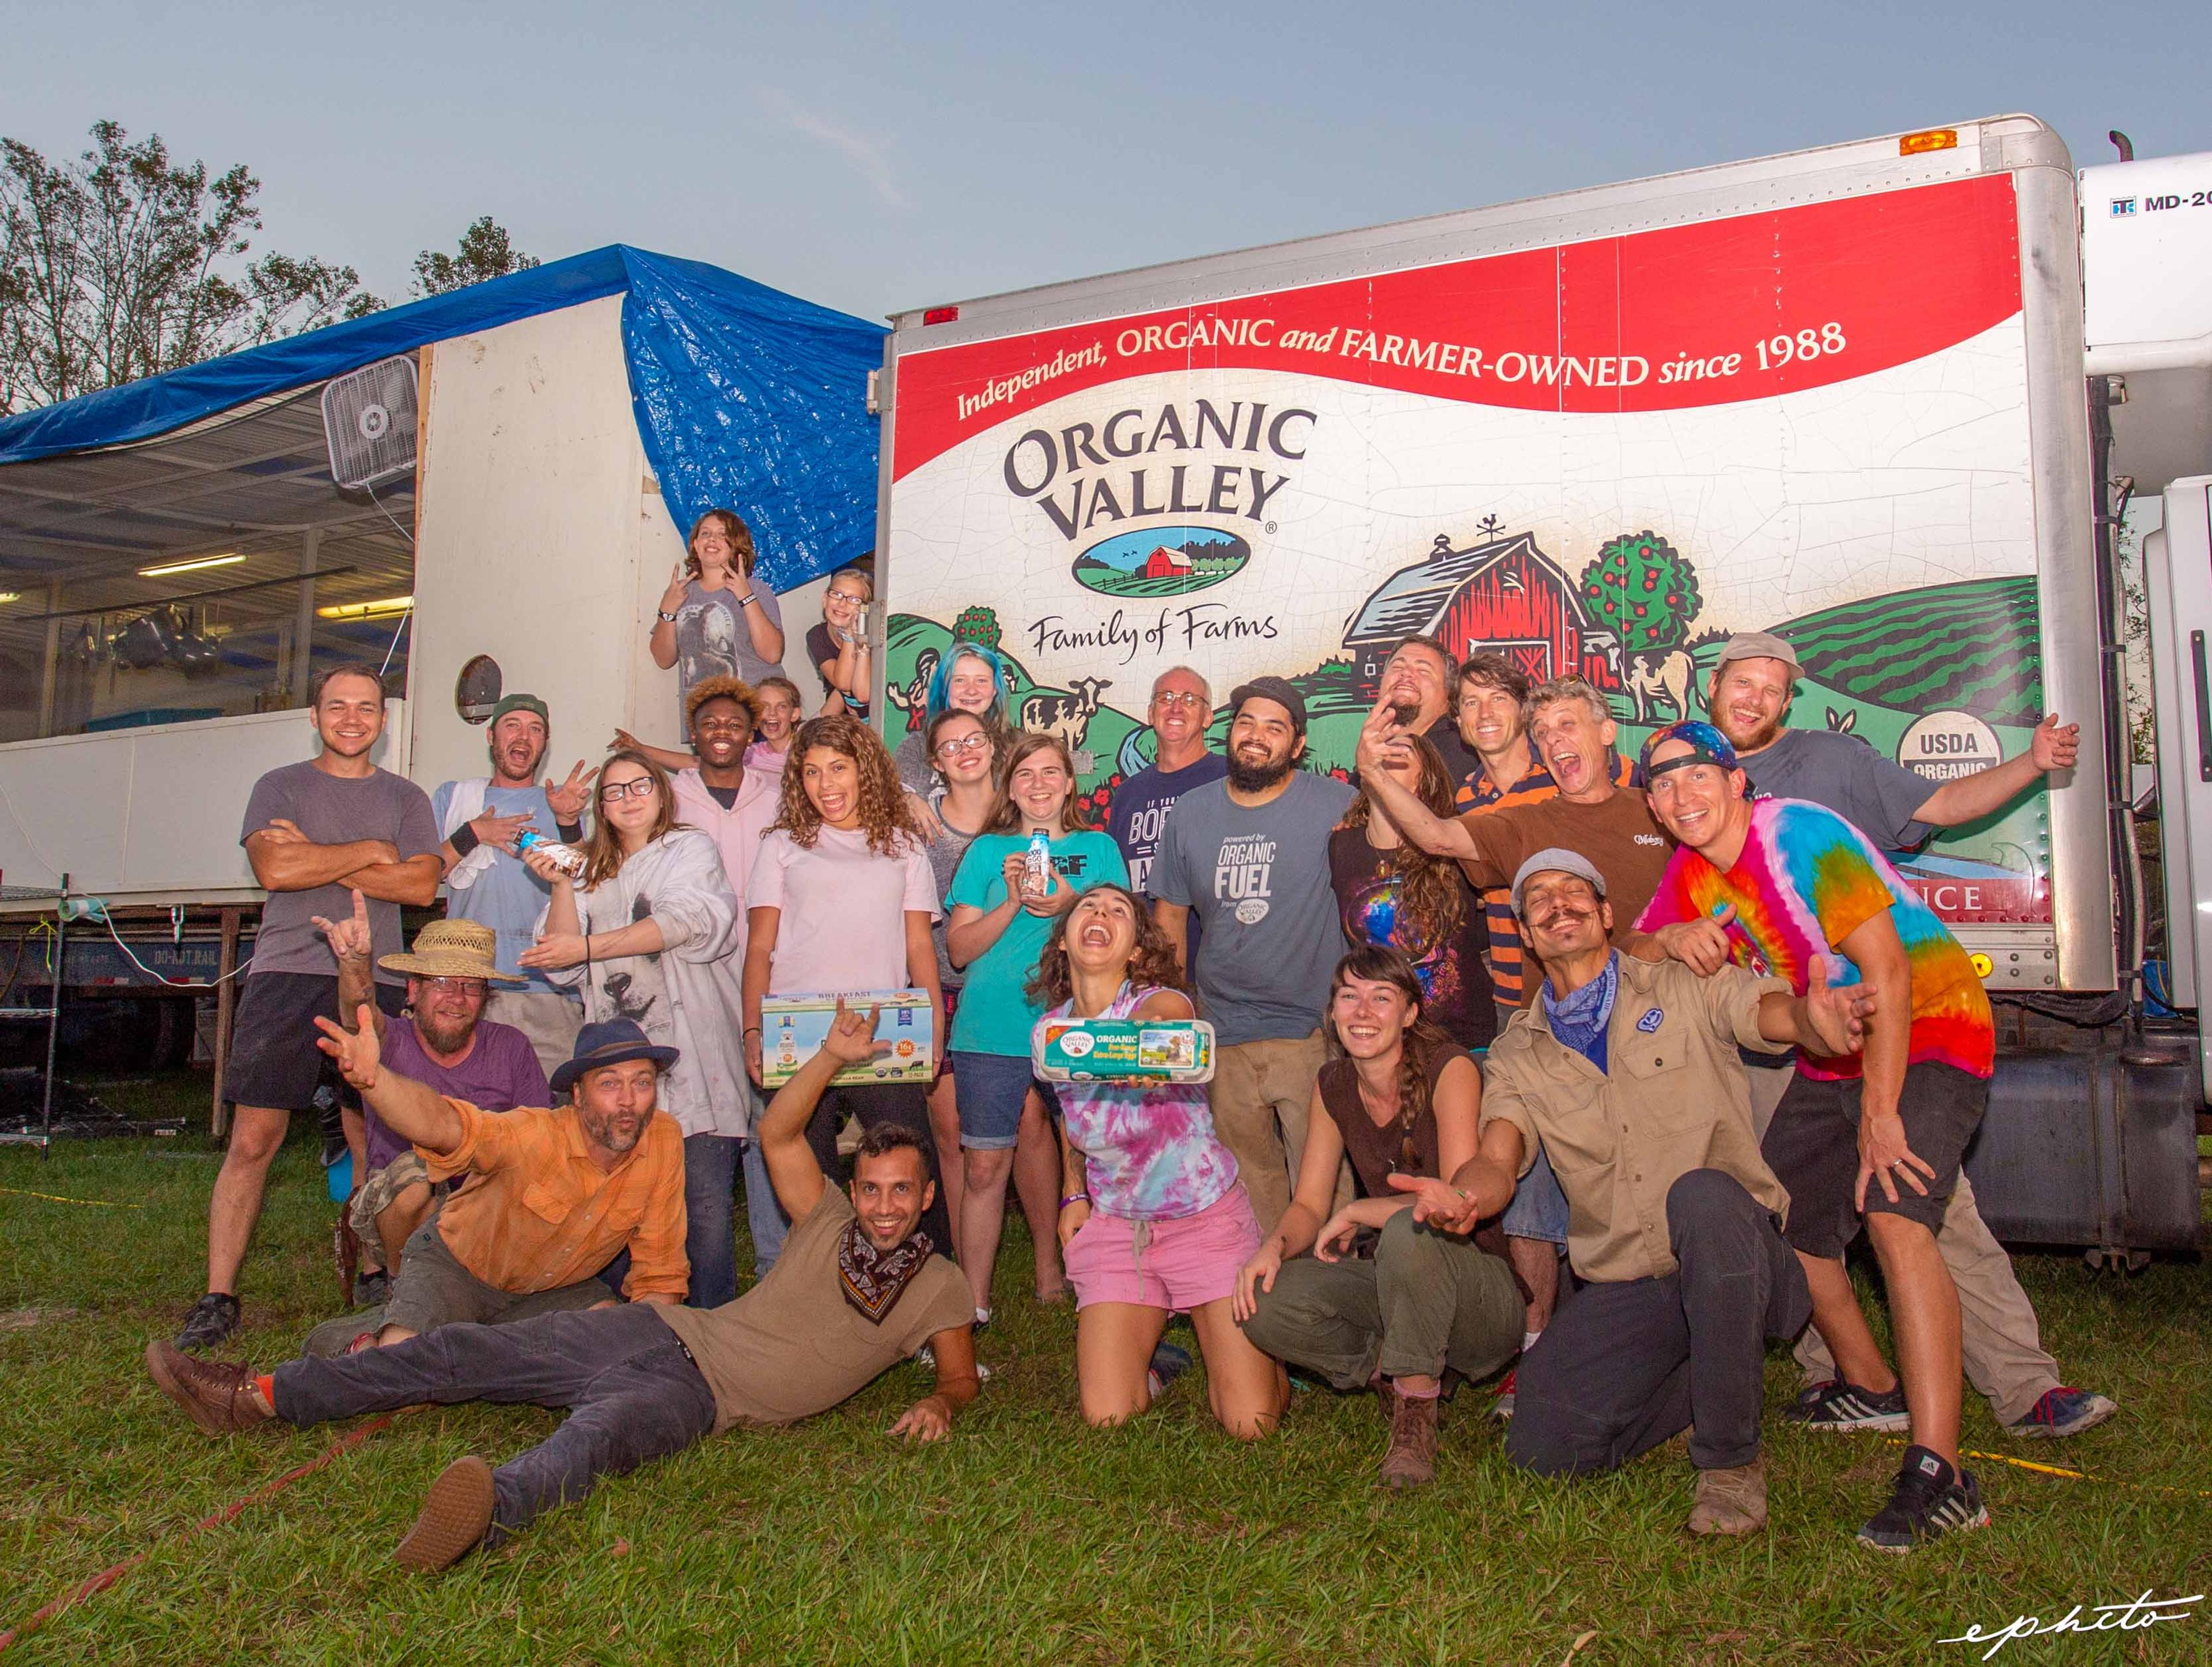 A group of volunteers do a fun pose in front of an Organic Valley delivery truck.